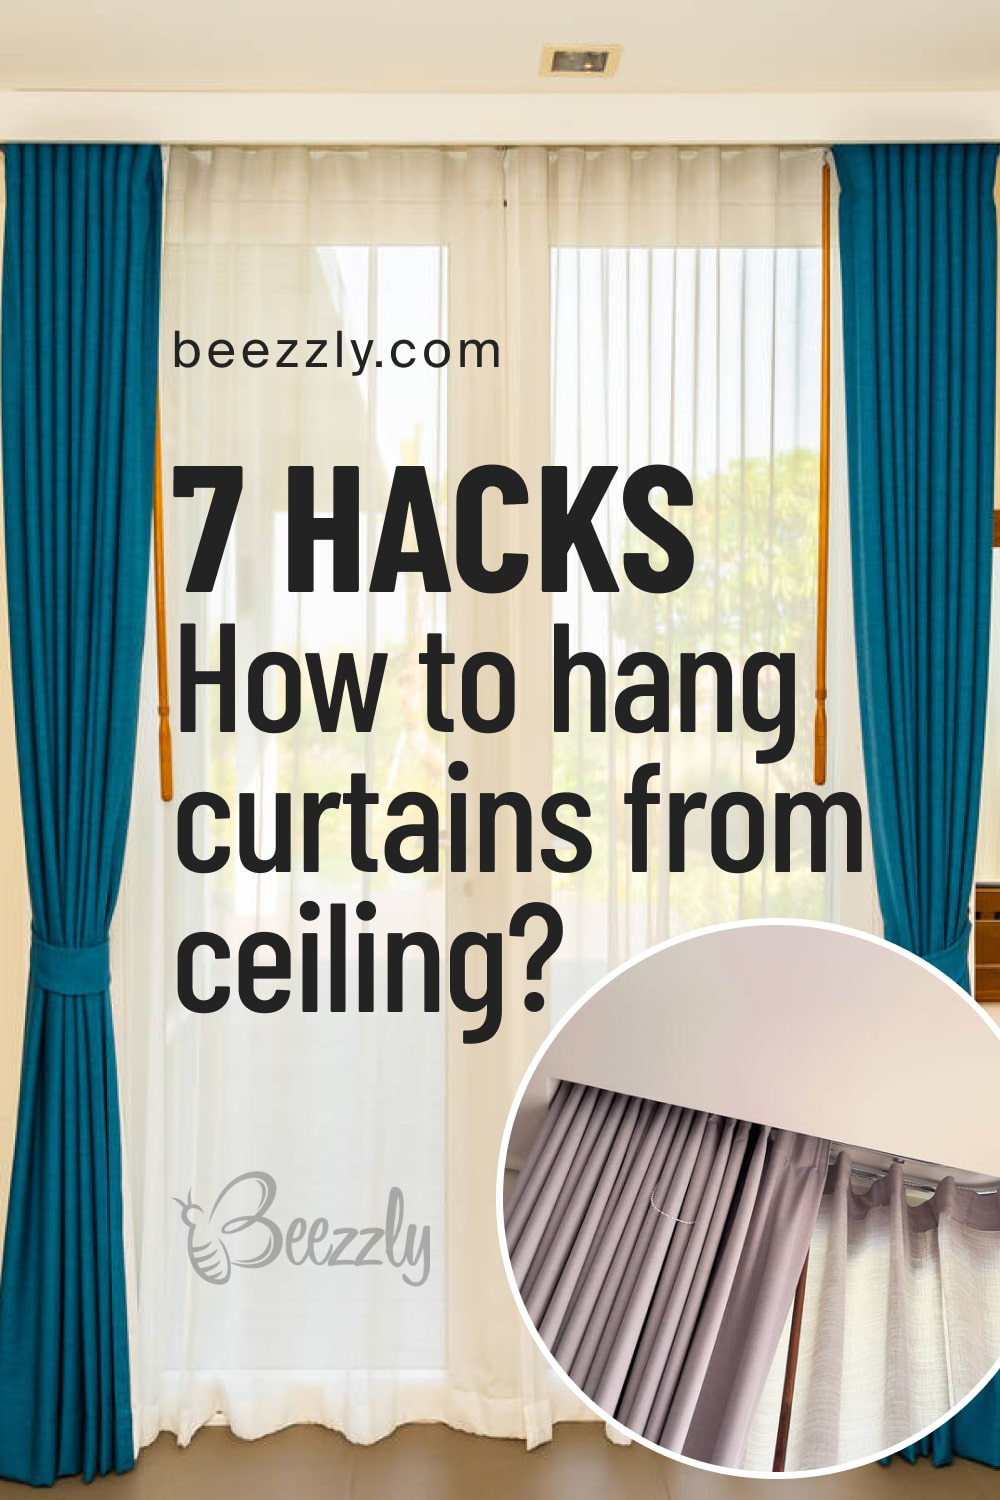 7 hacks. How to hang curtains from ceiling